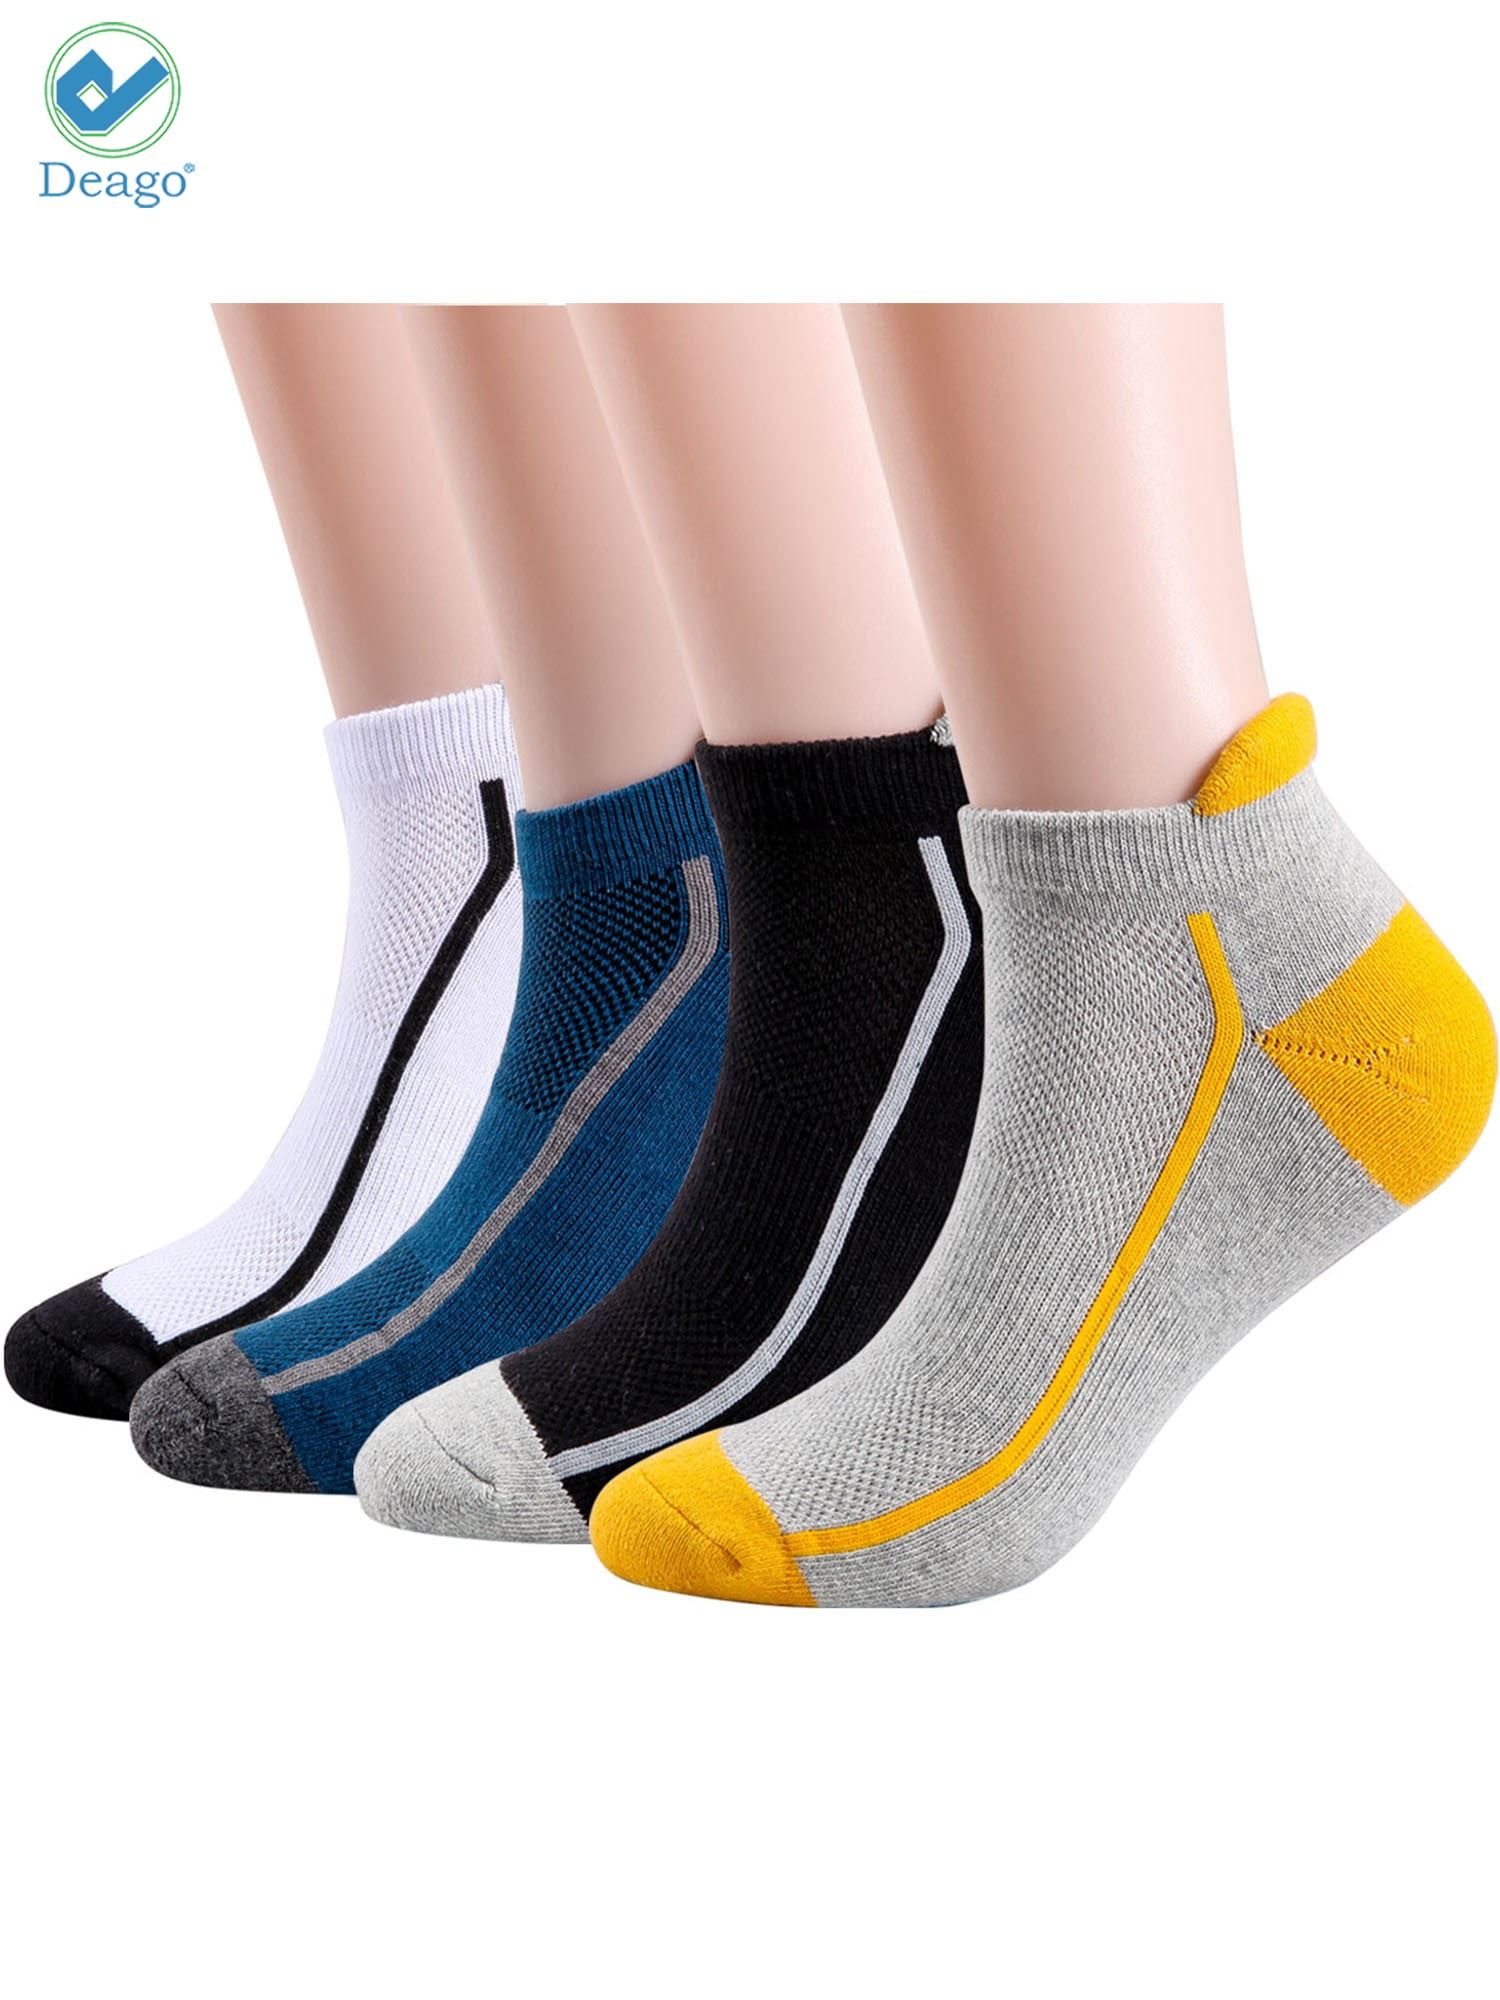 Mens Running Hiking Performance Outdoor Athletic Sport Ankle Cushion Tab Socks 